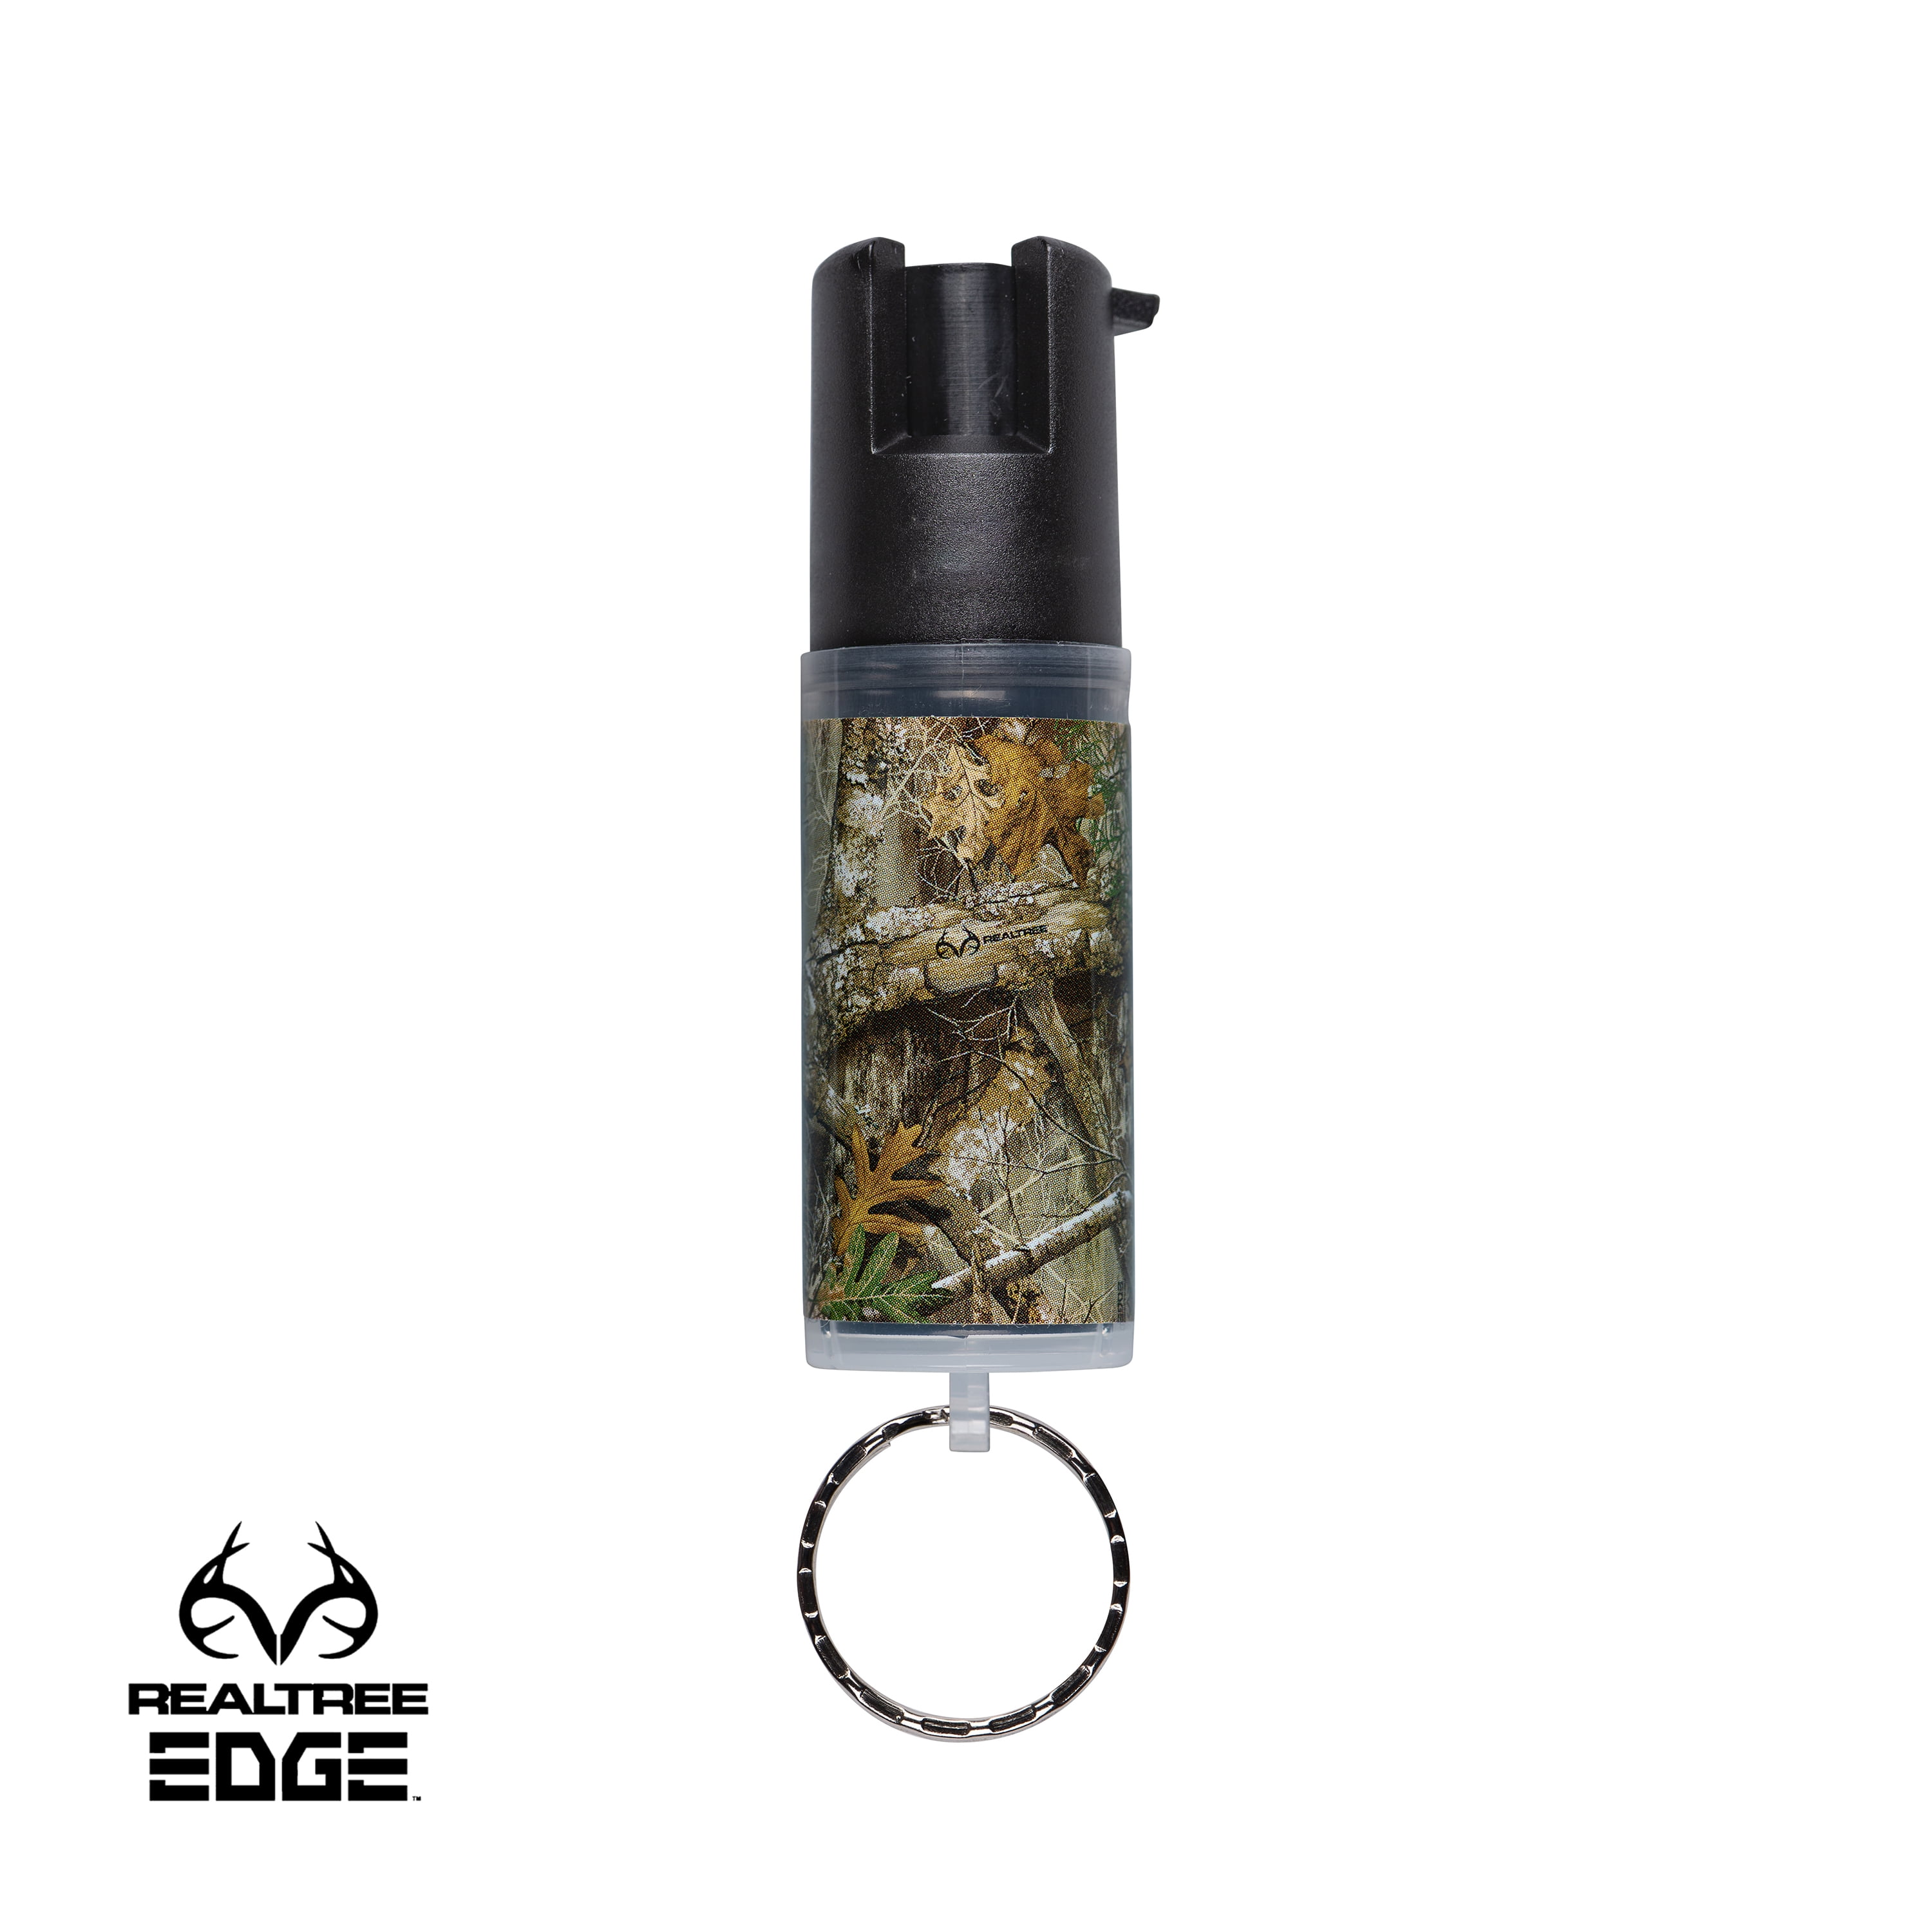 SABRE Realtree Edge Pepper Spray with Key Ring, Green Camo